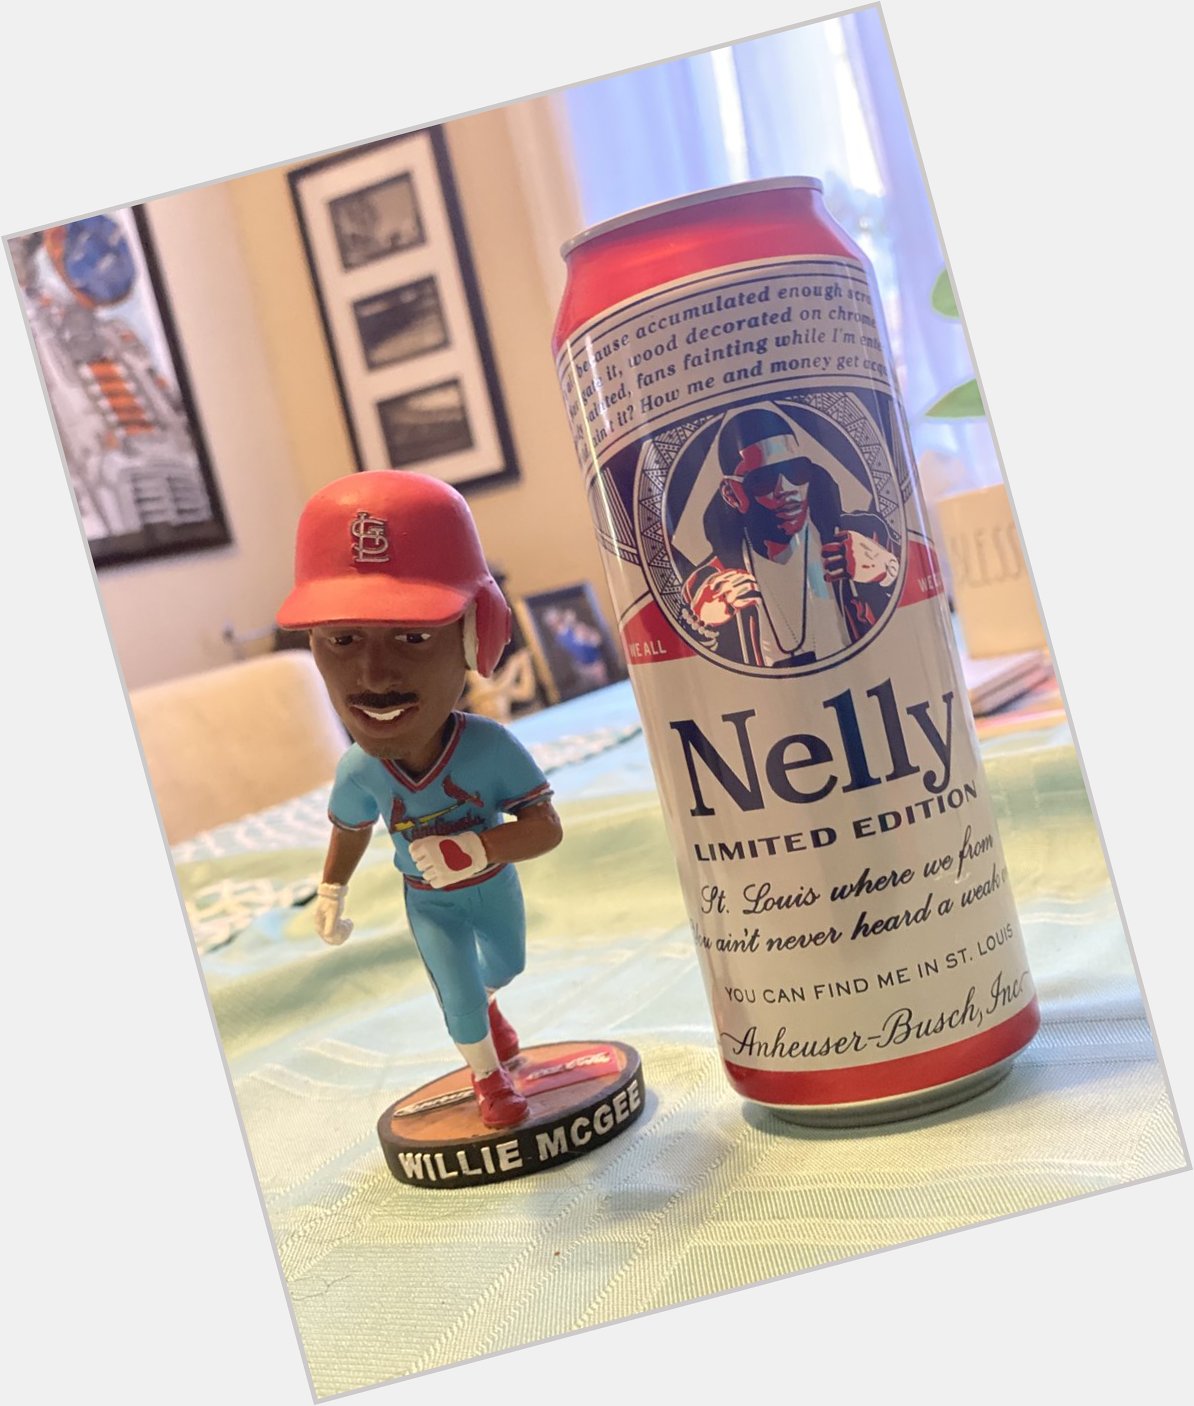 Besides March 14, today is the most St. Louis day there is - Happy birthday to both Willie and Nelly   